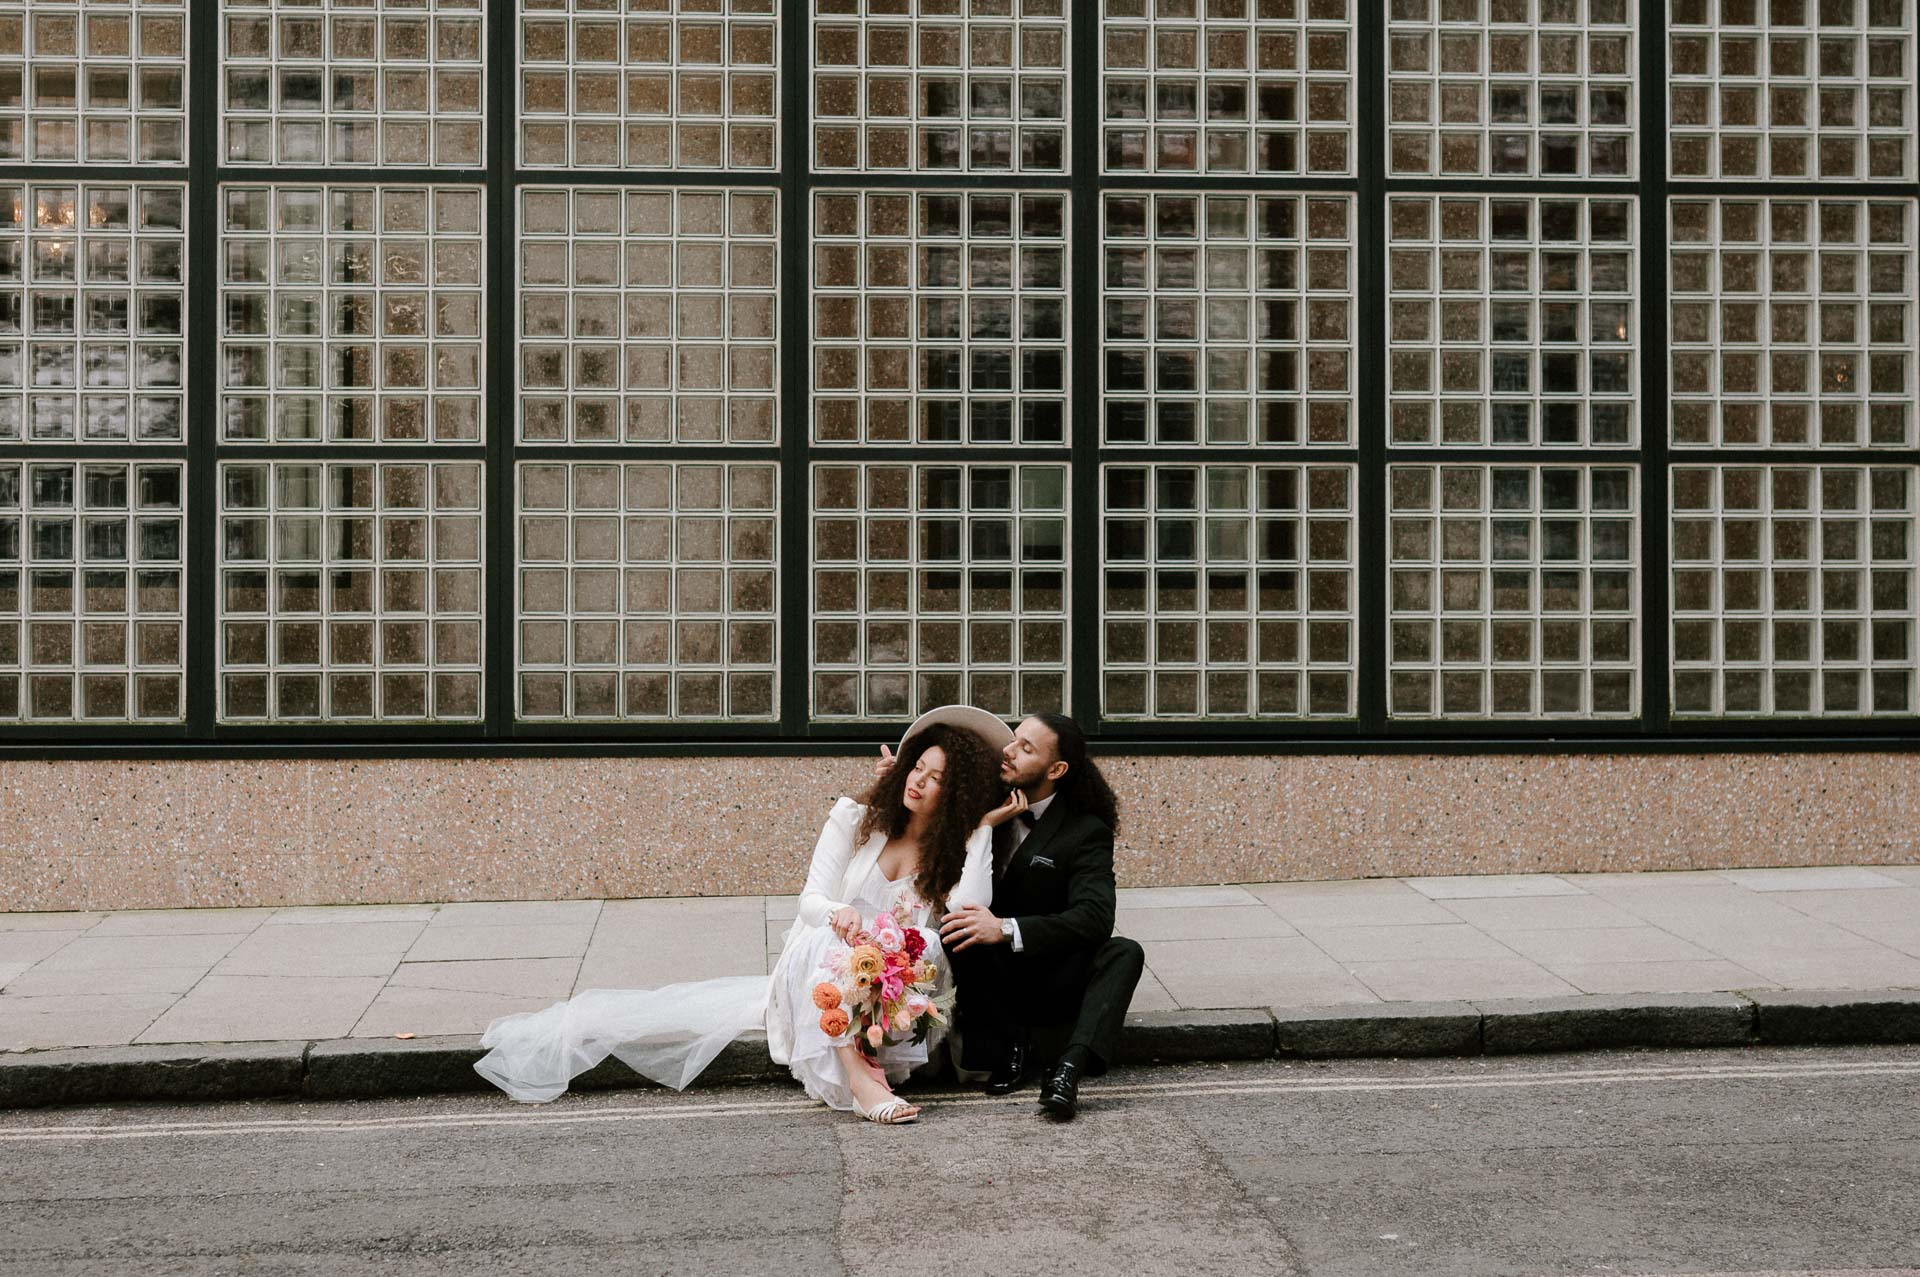 bride and groom sitting on pavement cuddling with colourful bouquet